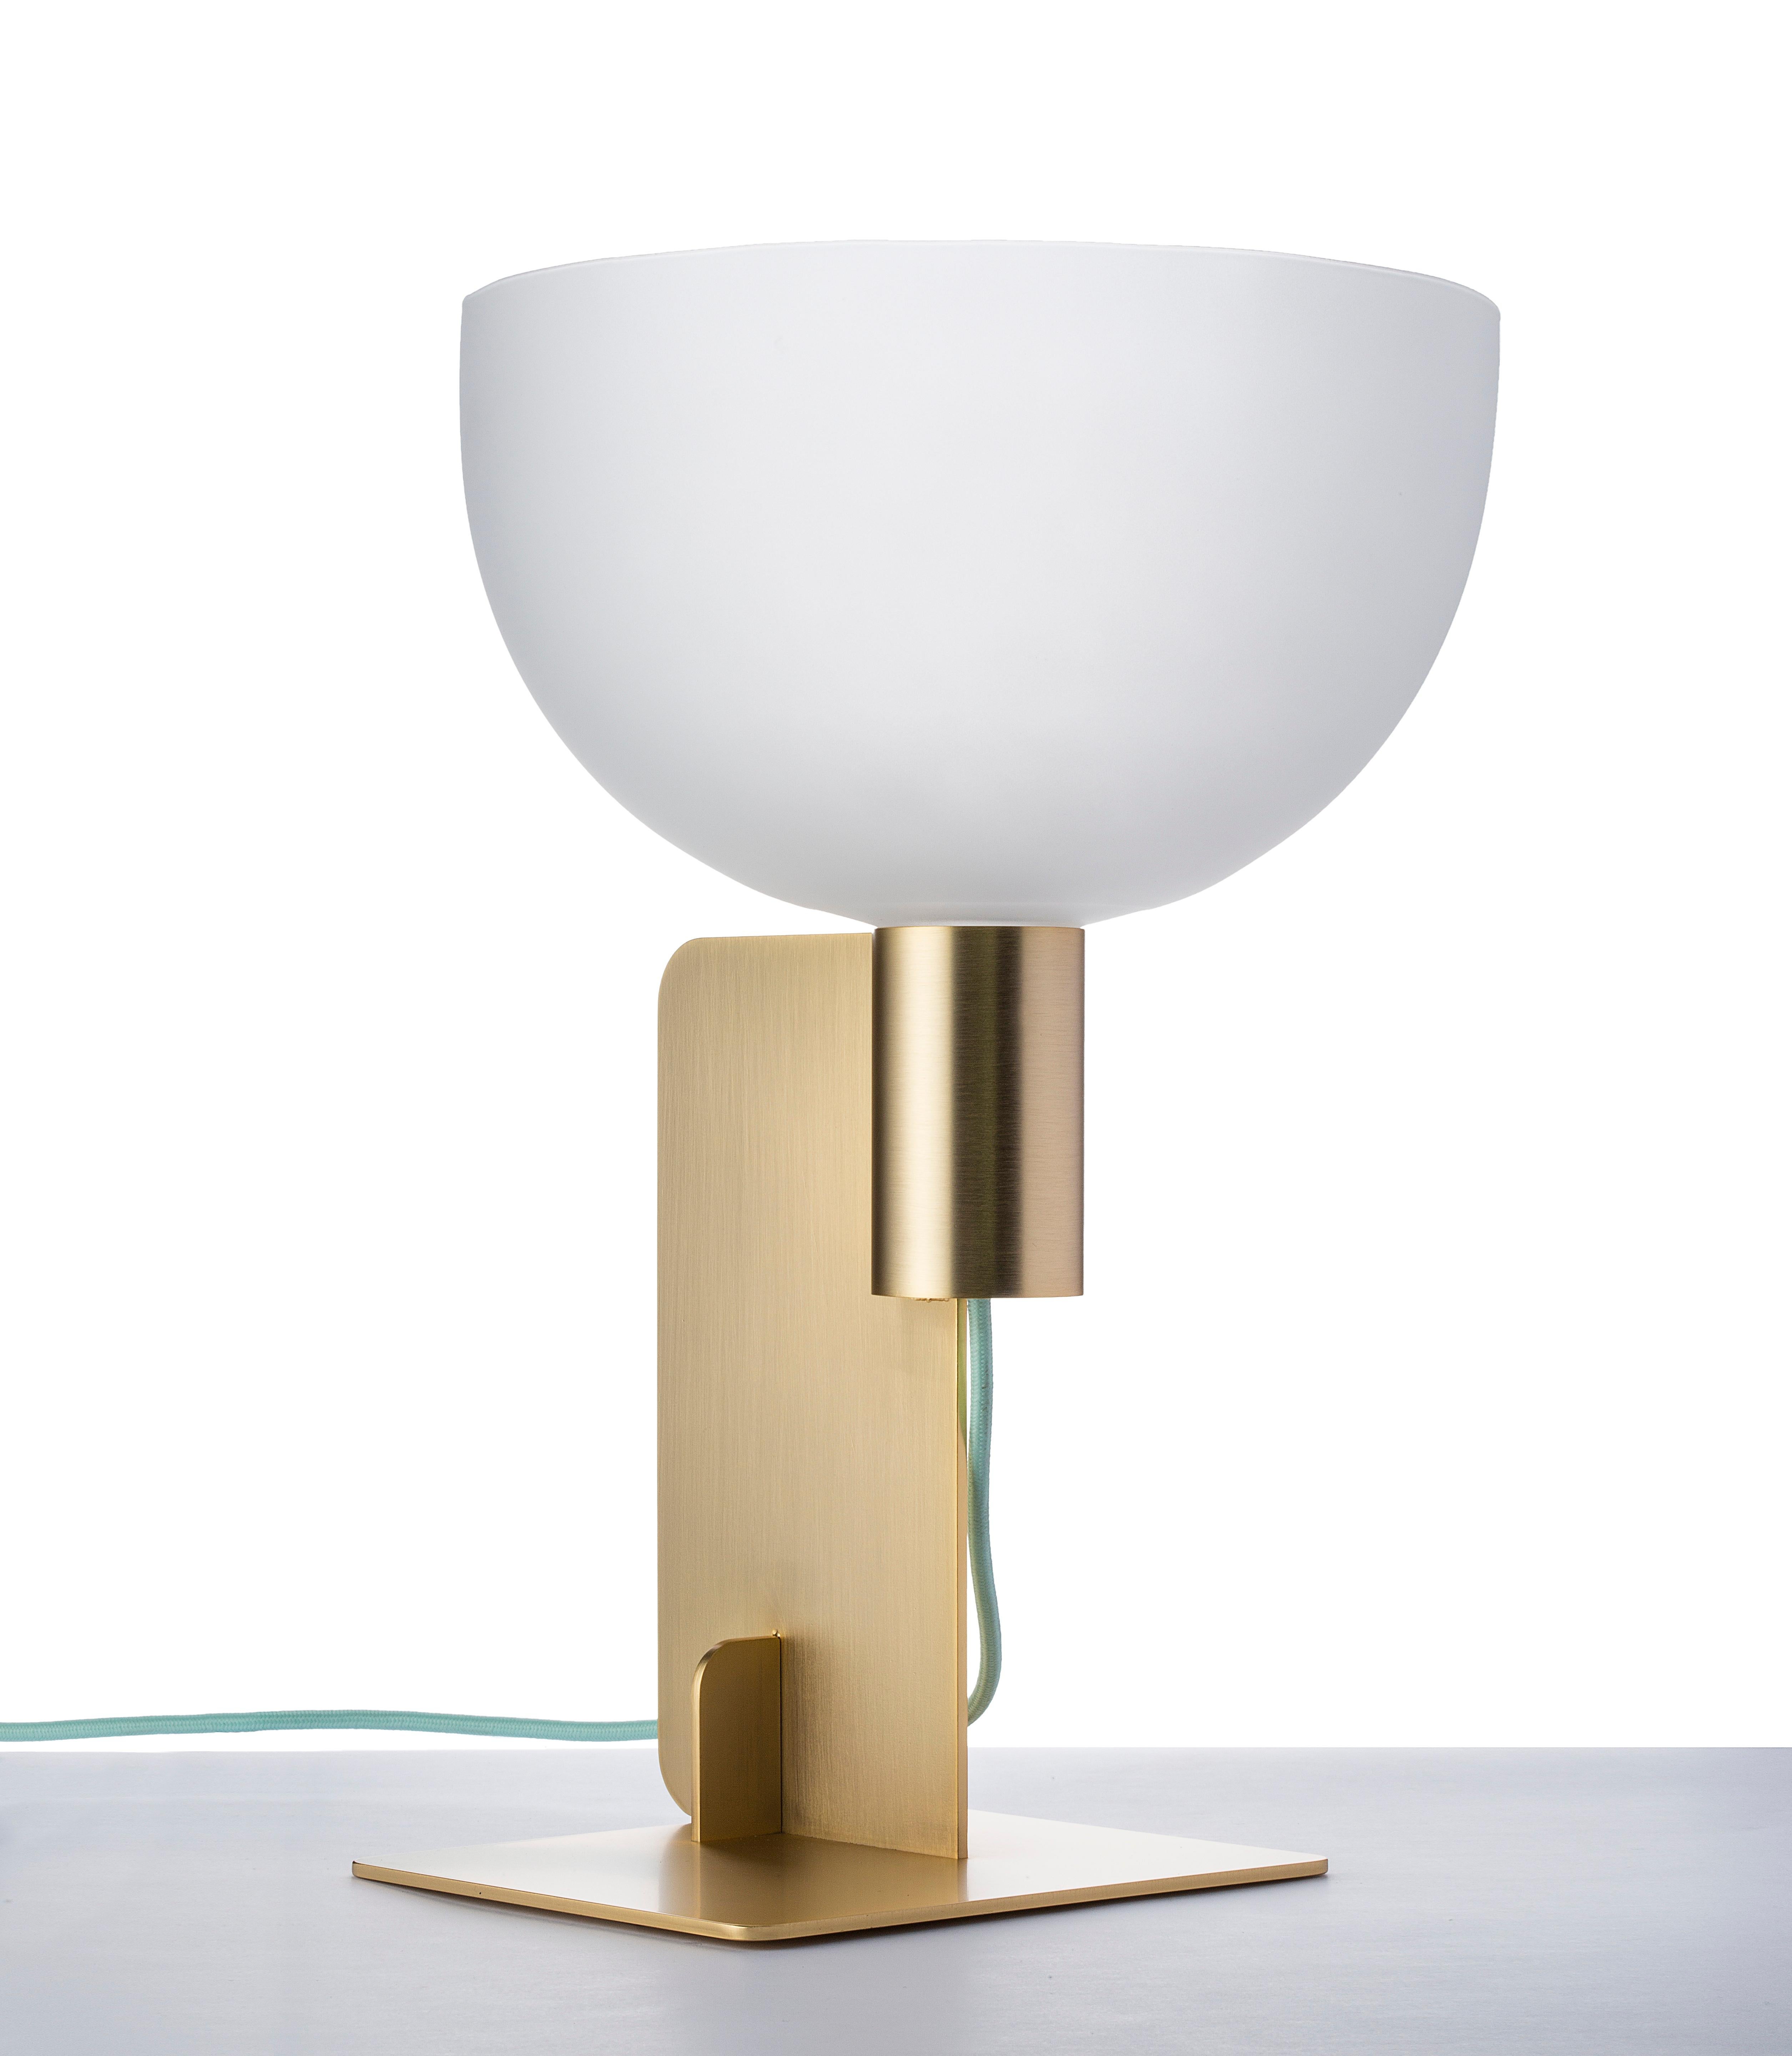 Olimpia Lamp by Secondome Edizioni
Limited Edition Of 90 pieces + 3 A.P.
Designer: ZAVEN.
Dimensions: D 28 x W 28 x H 45 cm.
Materials: Hand-blown glass and brass.
Collection / Production: Secondome. 

The lamp OLIMPIA by ZAVEN is a 3D collage, made